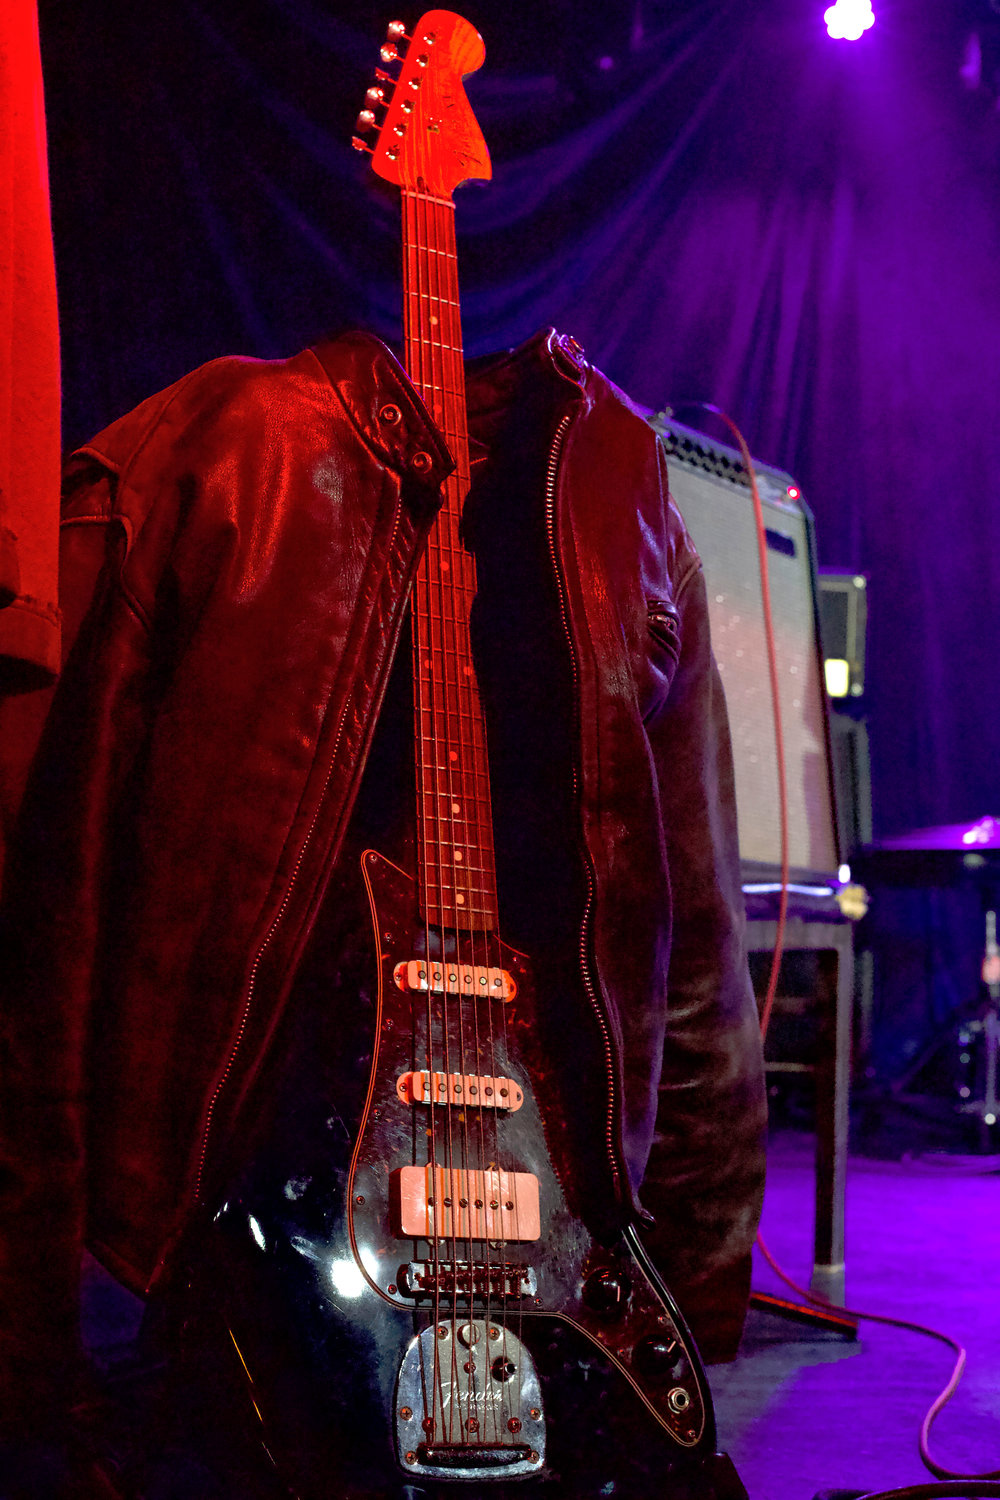 Aron Christensen’s coat rests upon his bass on stage at Dante’s during a 50th birthday celebration for Christensen at Dante’s on Friday. Christensen, who died in August at the age of 49, was a lifelong musician who helped establish Dante’s in 2000.